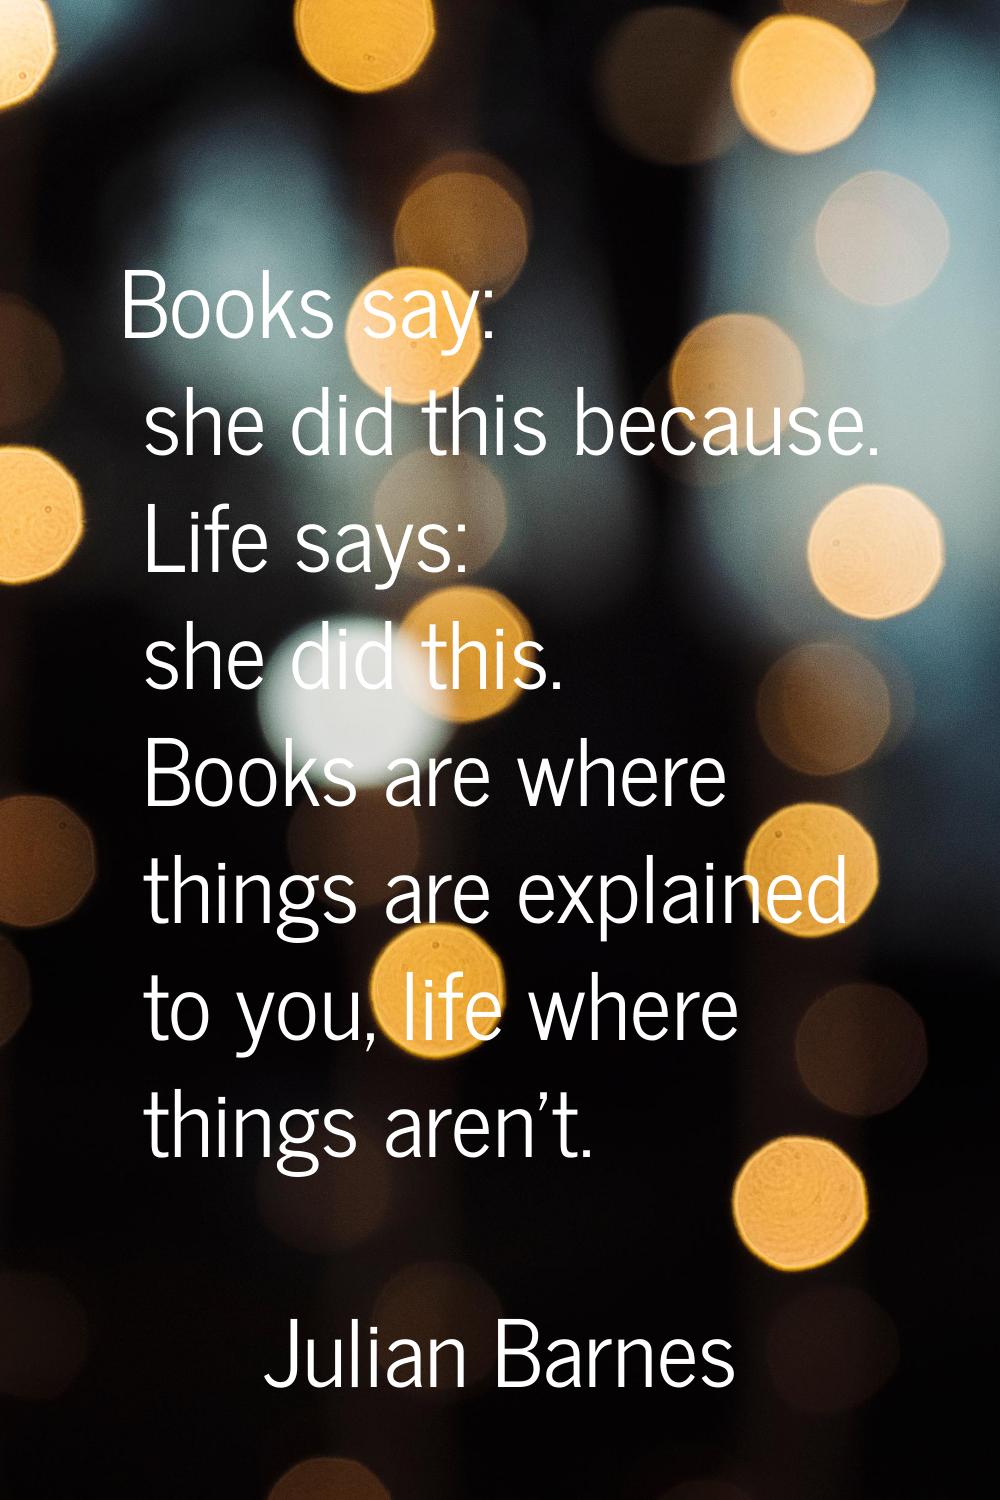 Books say: she did this because. Life says: she did this. Books are where things are explained to y